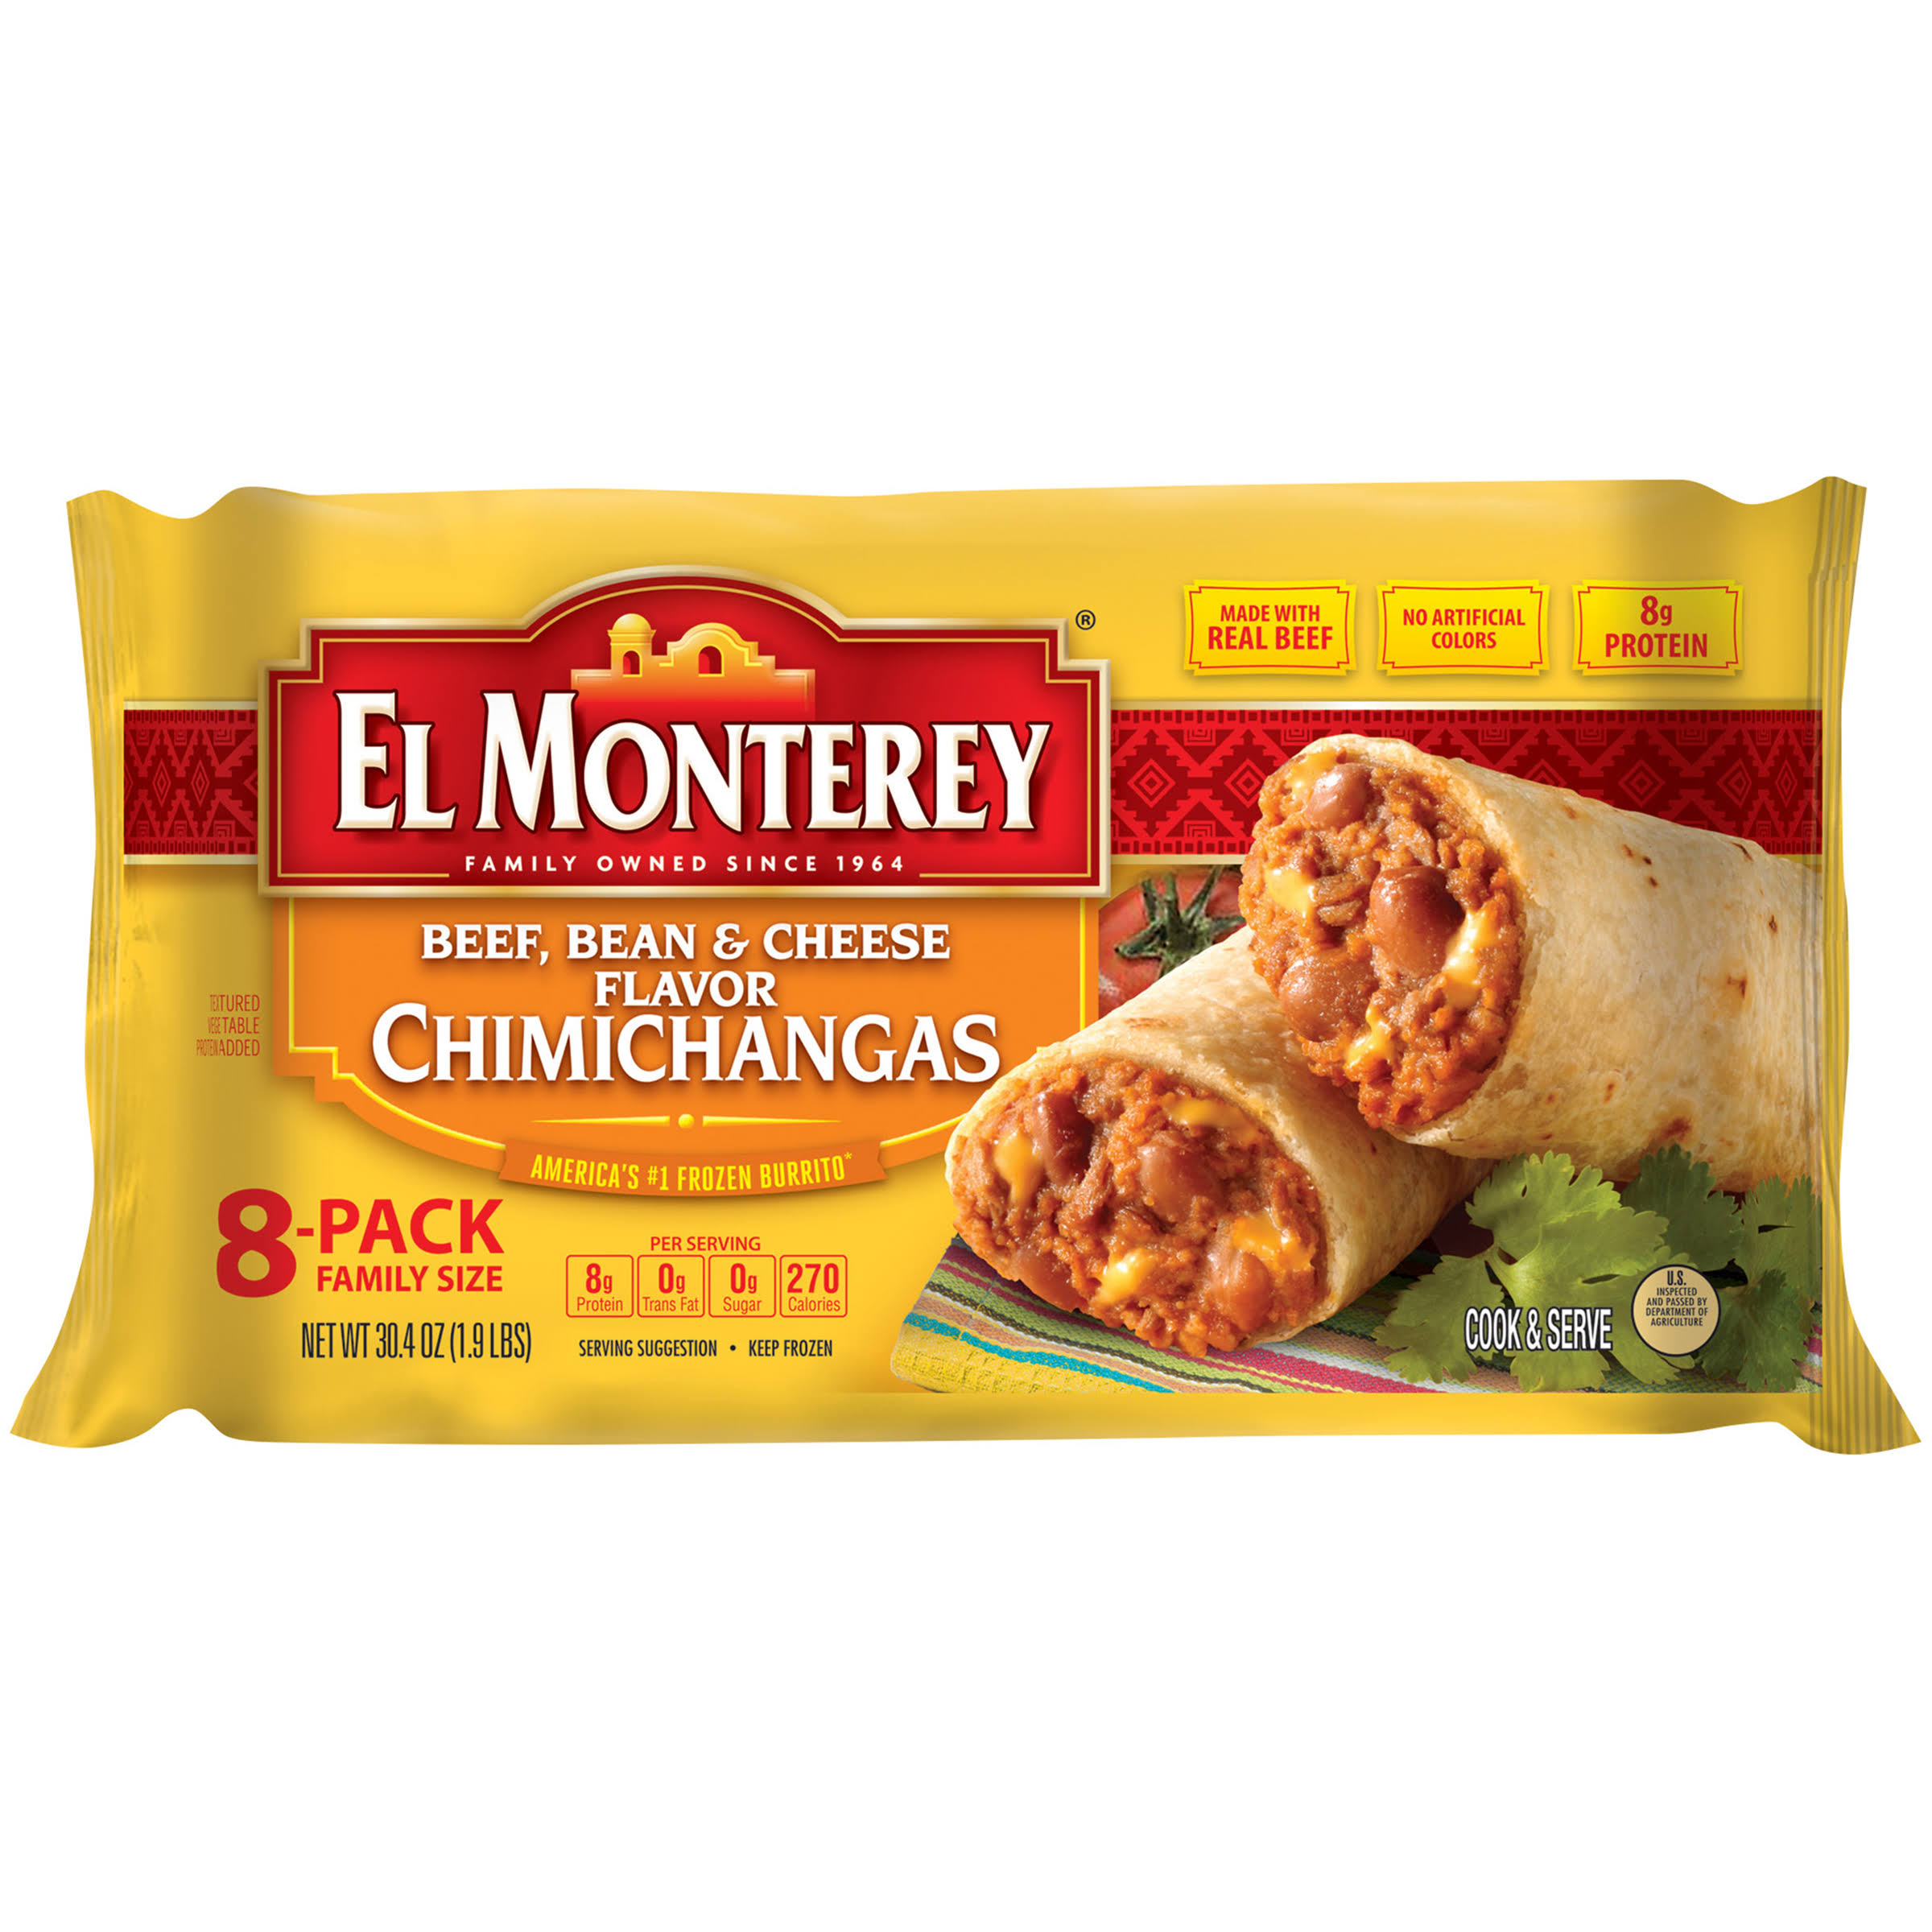 El Monterey Chimichangas Frozen Burrito - Beef, Bean and Cheese Flavor, Family Size, 8ct, 30.4oz